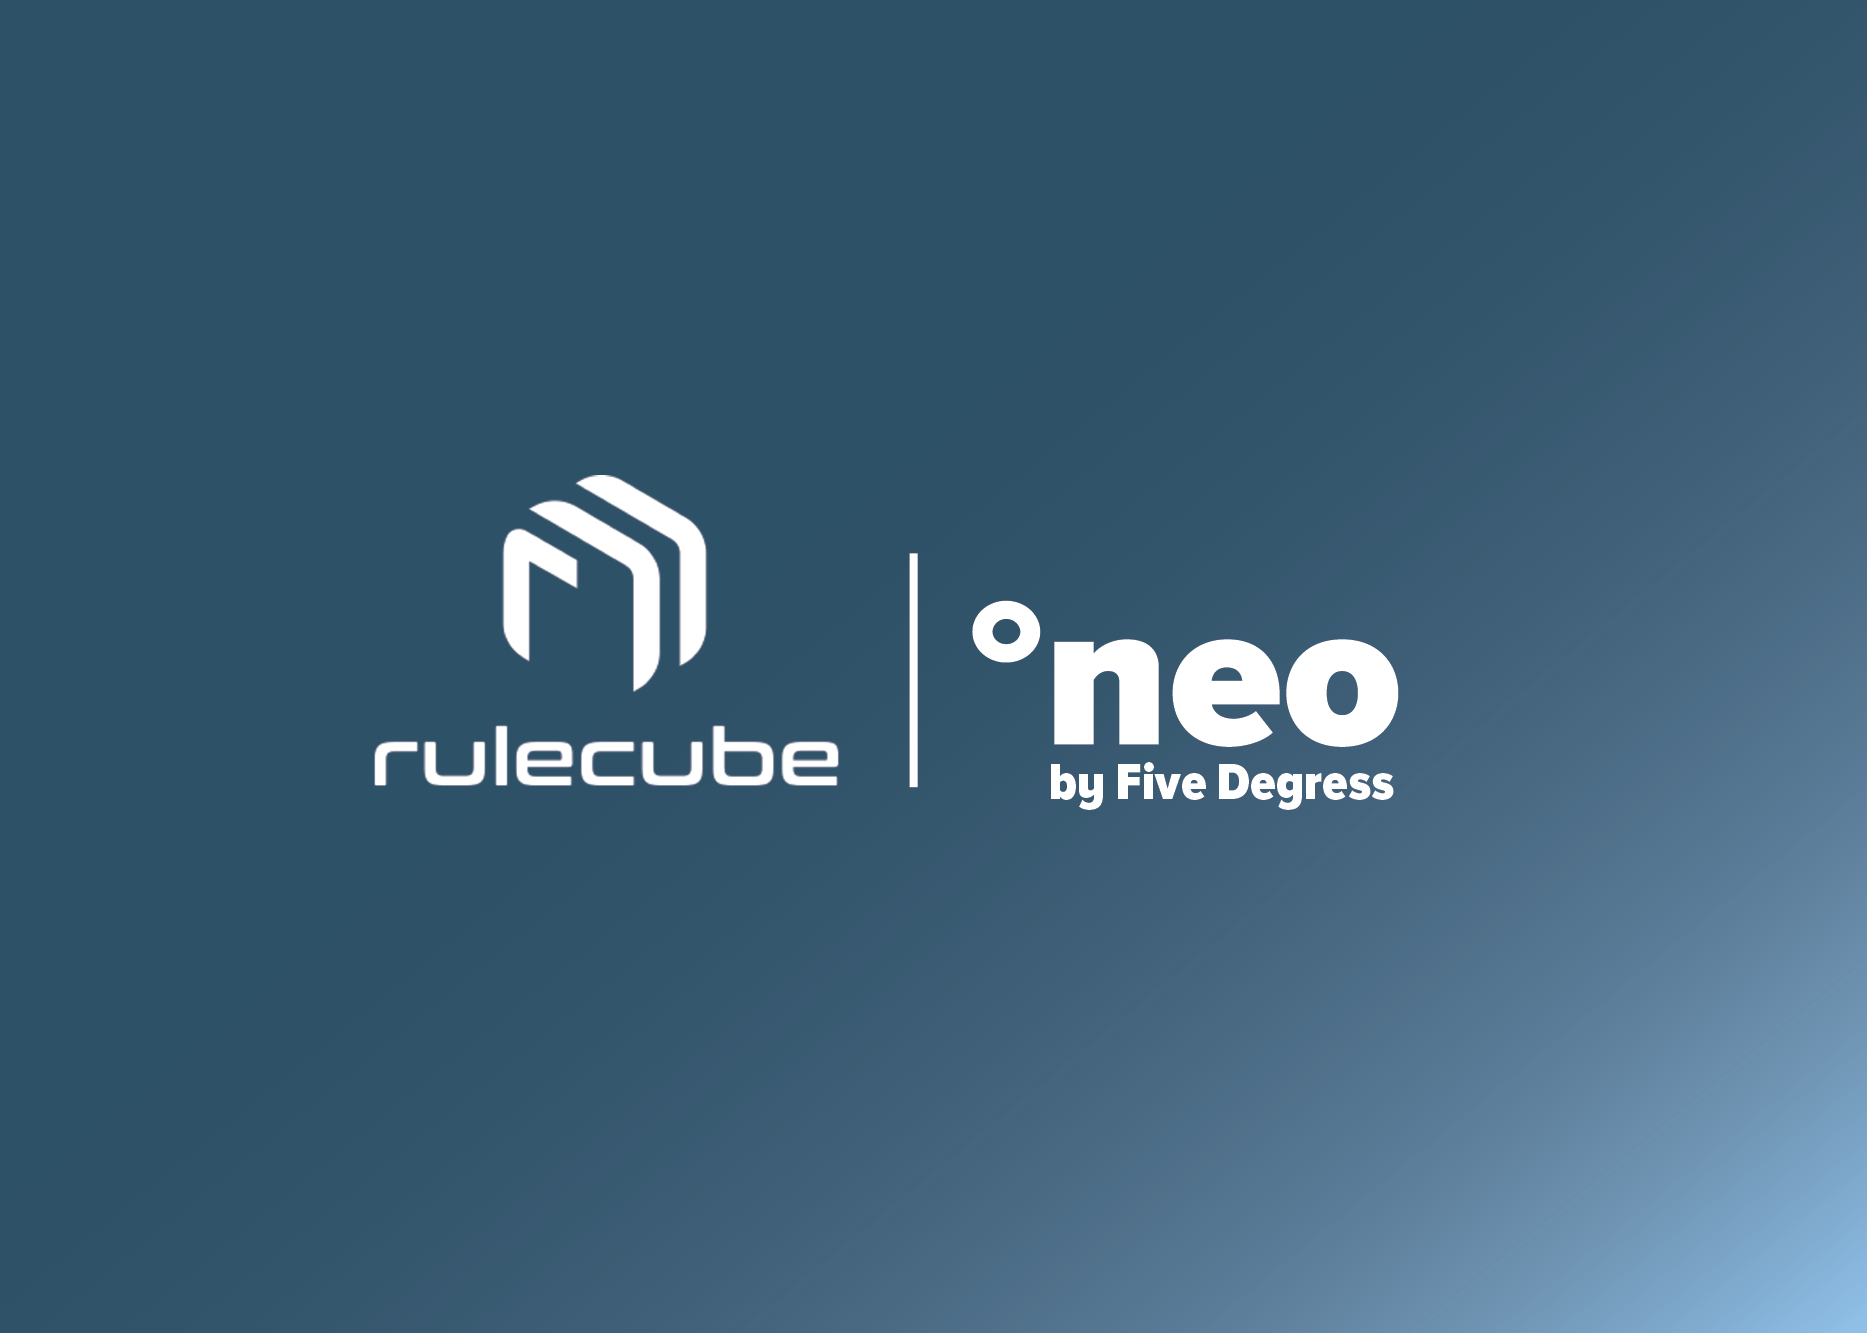 Rule cube and five degrees collaboration